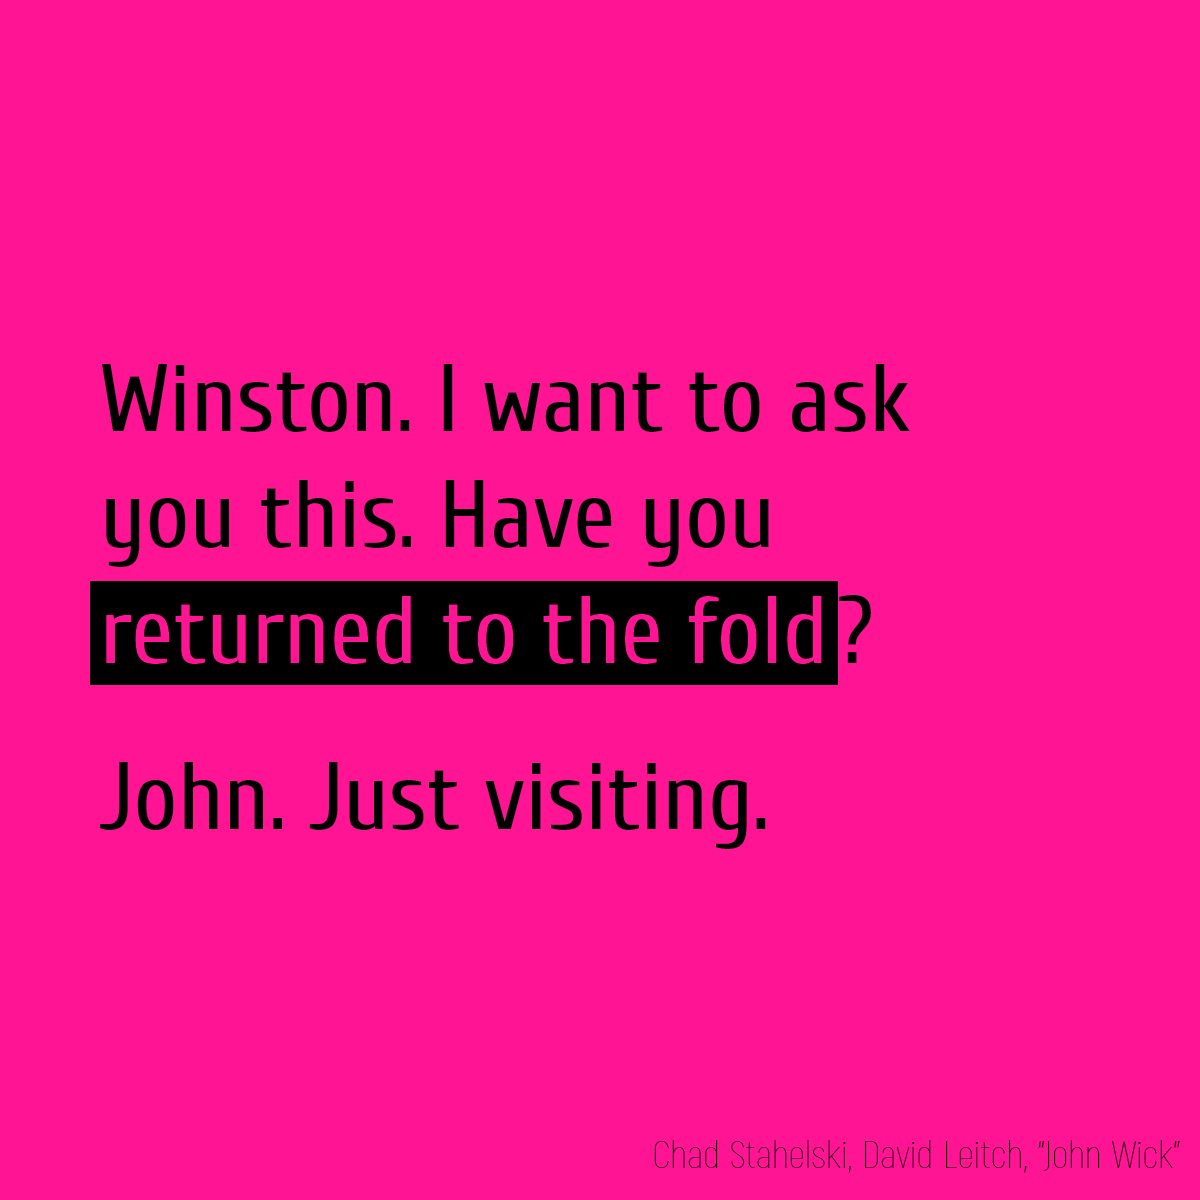 Winston. I want to ask you this. Have you **returned to the fold**? John. Just visiting.